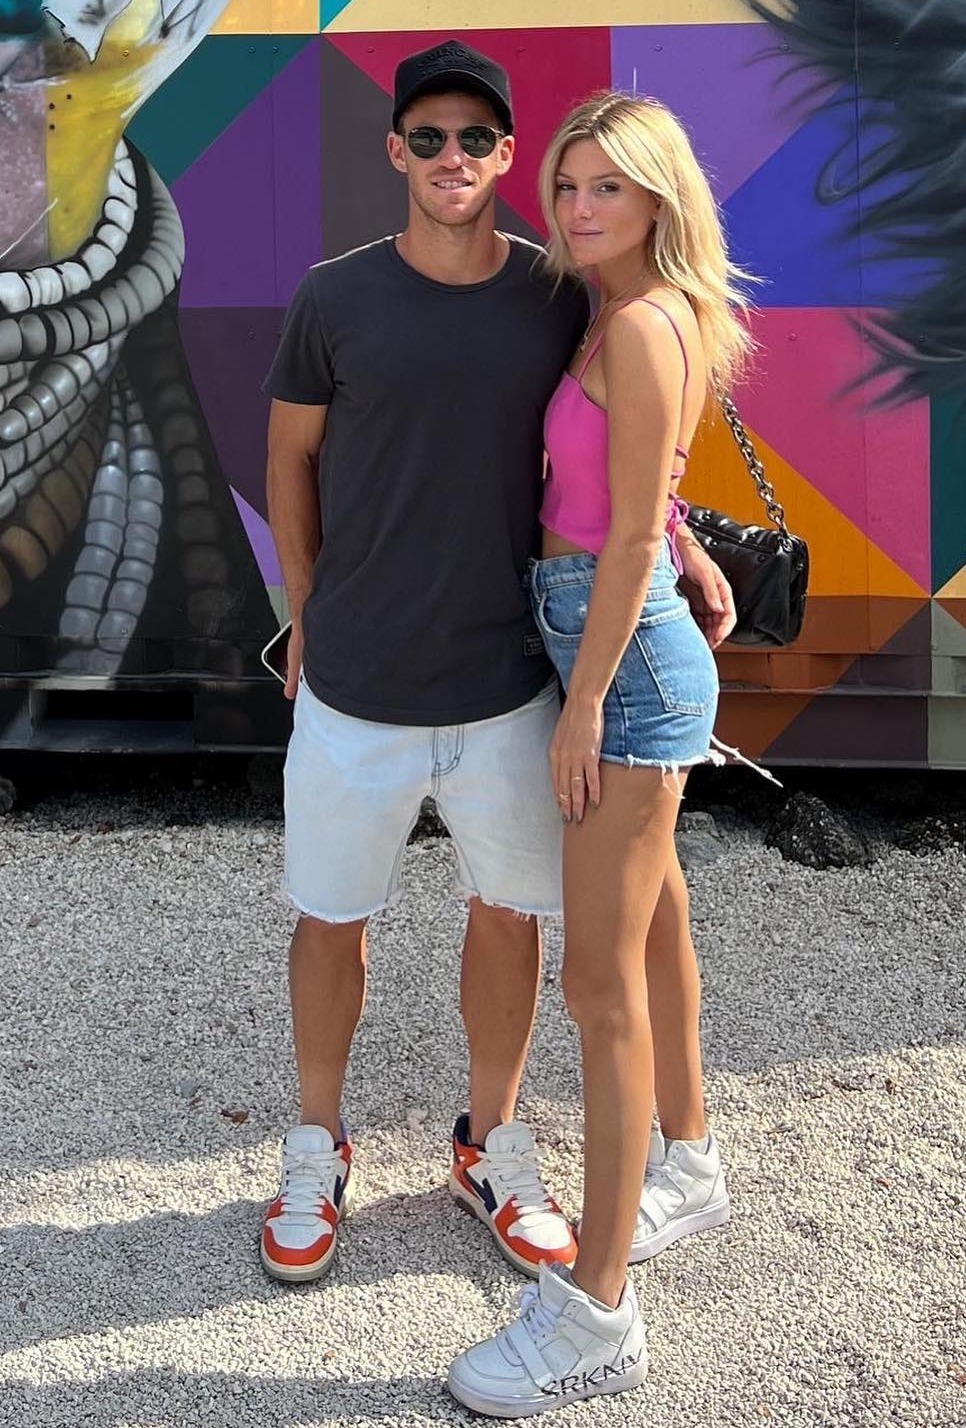 , Meet the gorgeous Wags glamming up the Australian Open – from a TikTok star to football legend’s daughter and fellow pro